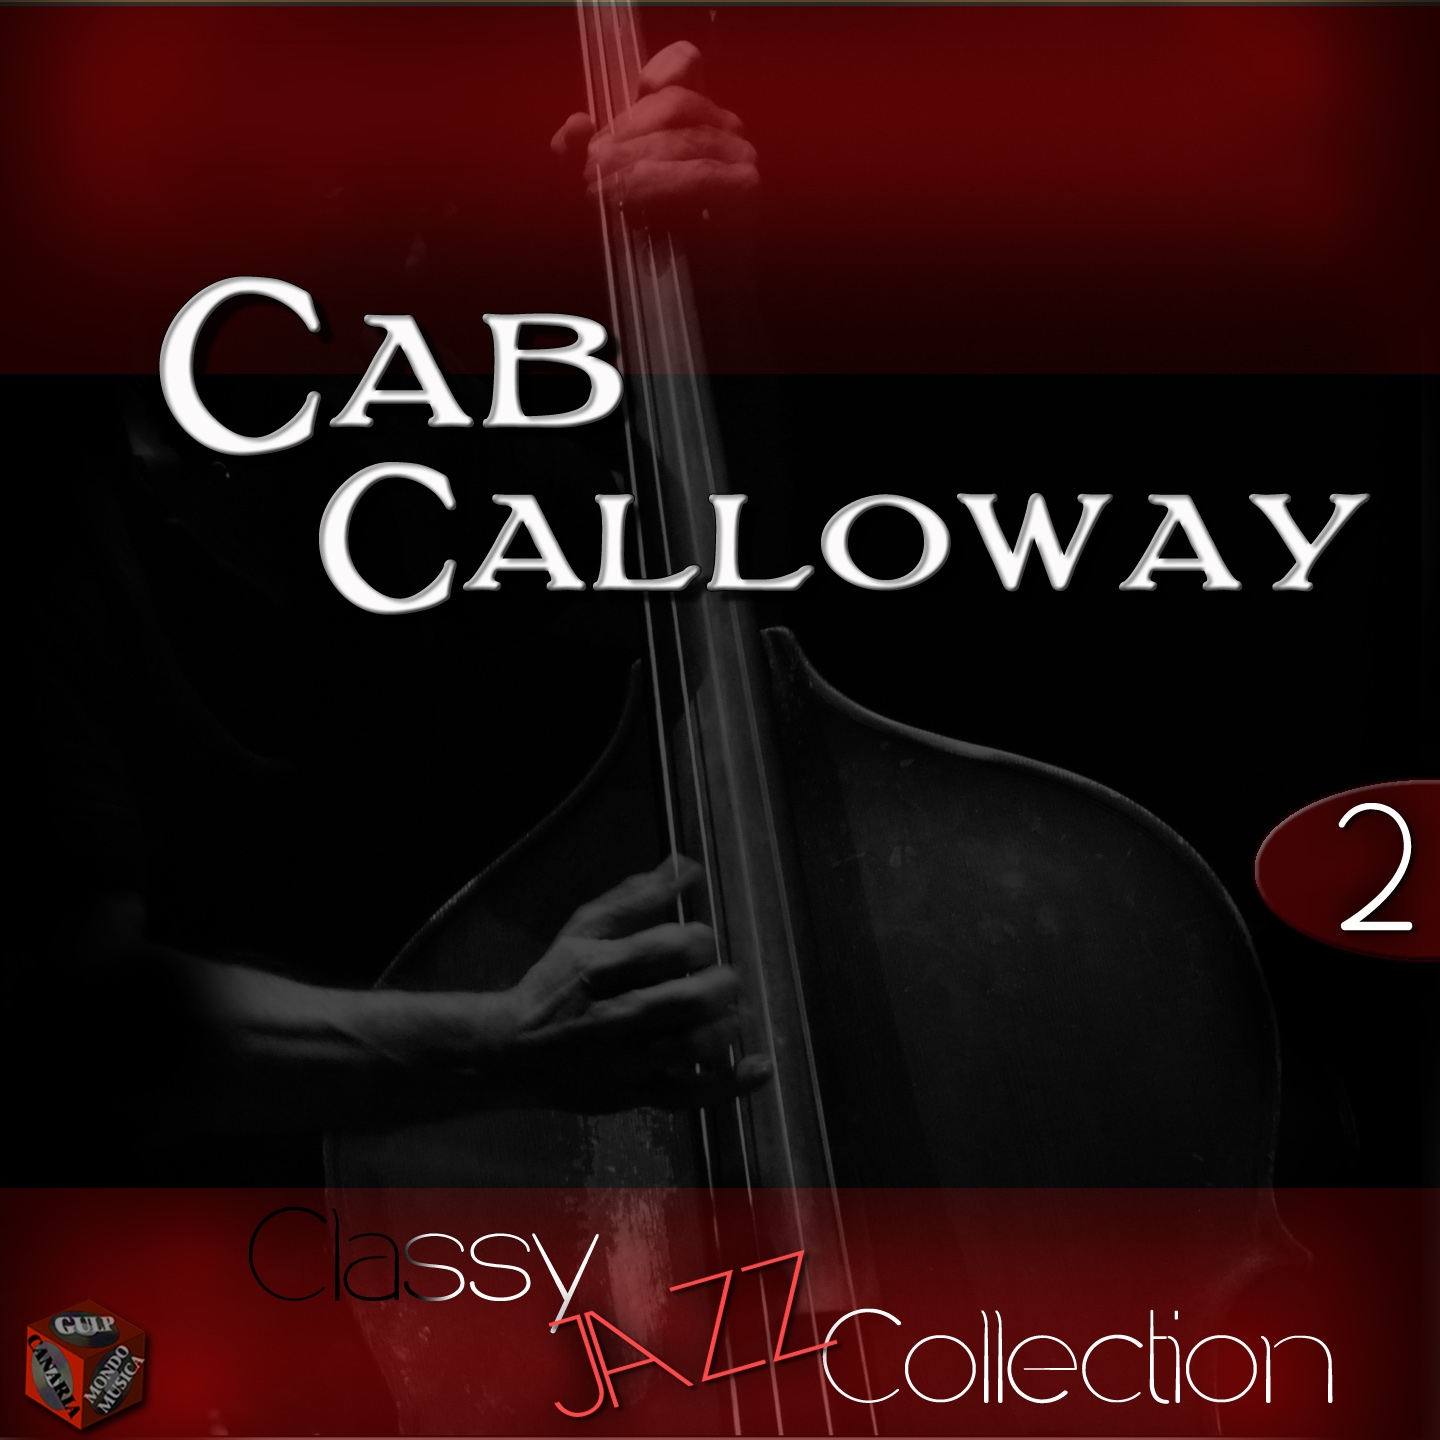 Classy Jazz Collection: Cab Calloway, Vol. 2